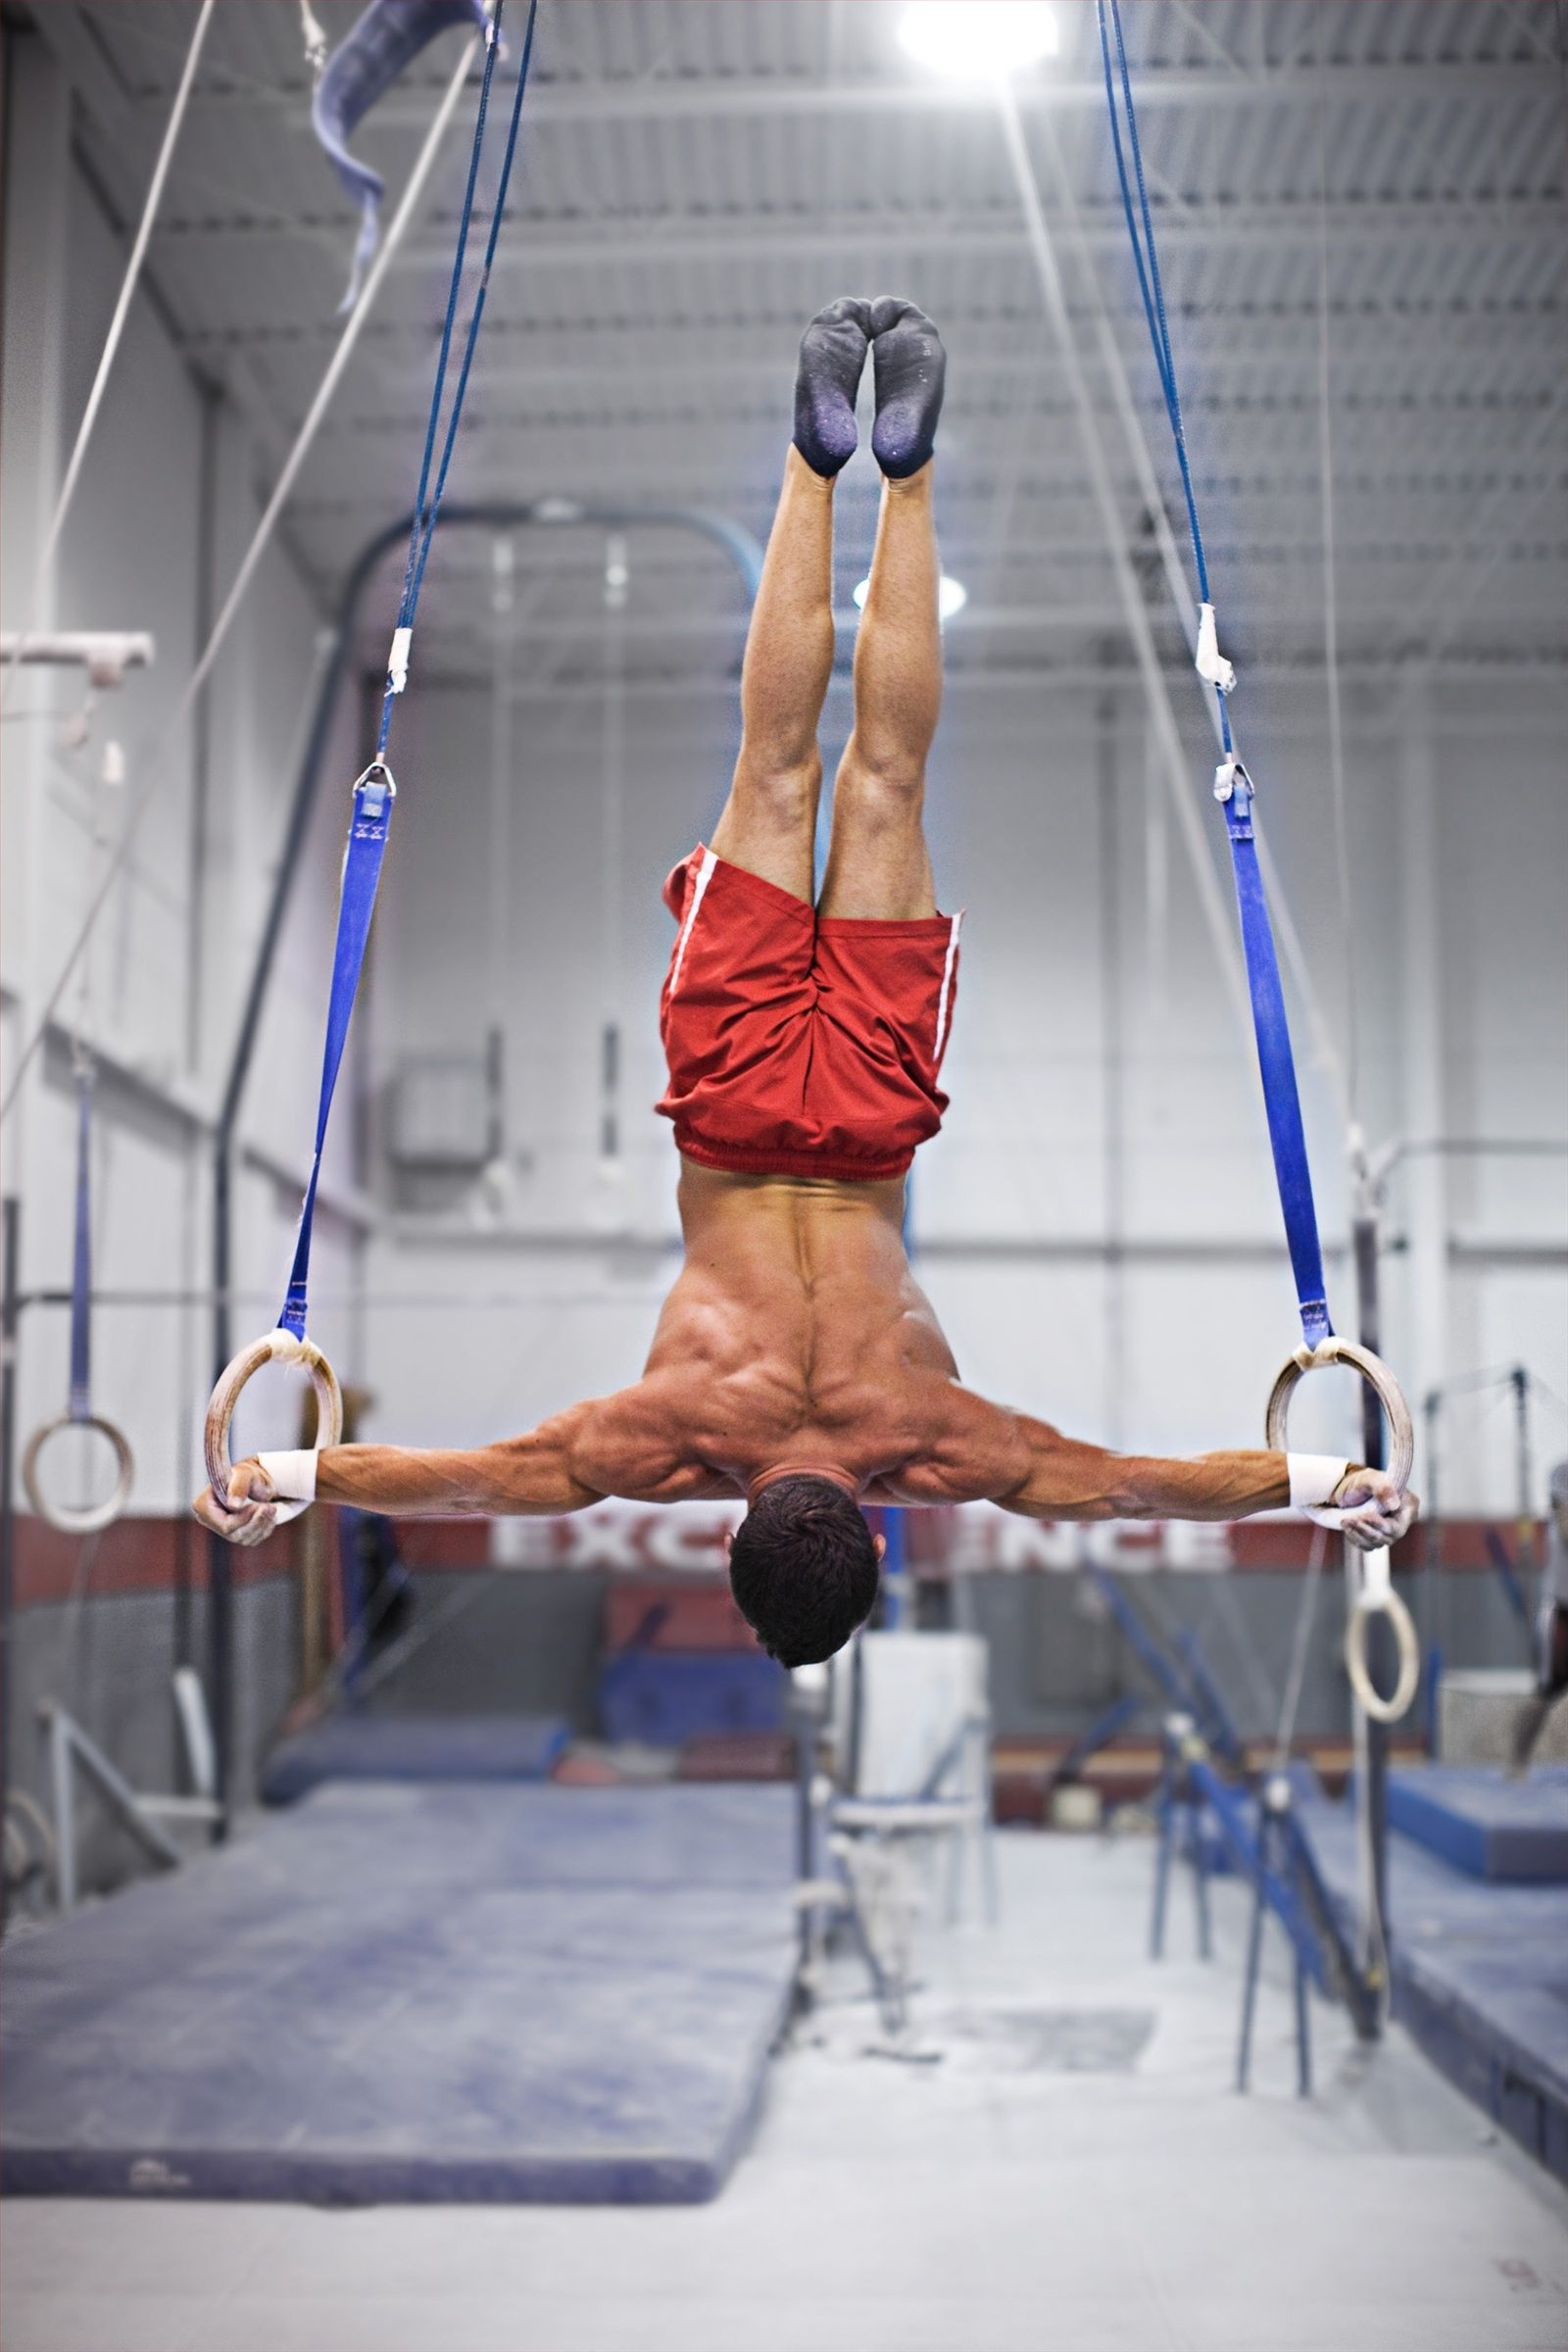 Rings (Gymnastics): Ideas, Kip and swing elements, Ring grips, Gym, Indoor Workout. 1600x2400 HD Wallpaper.